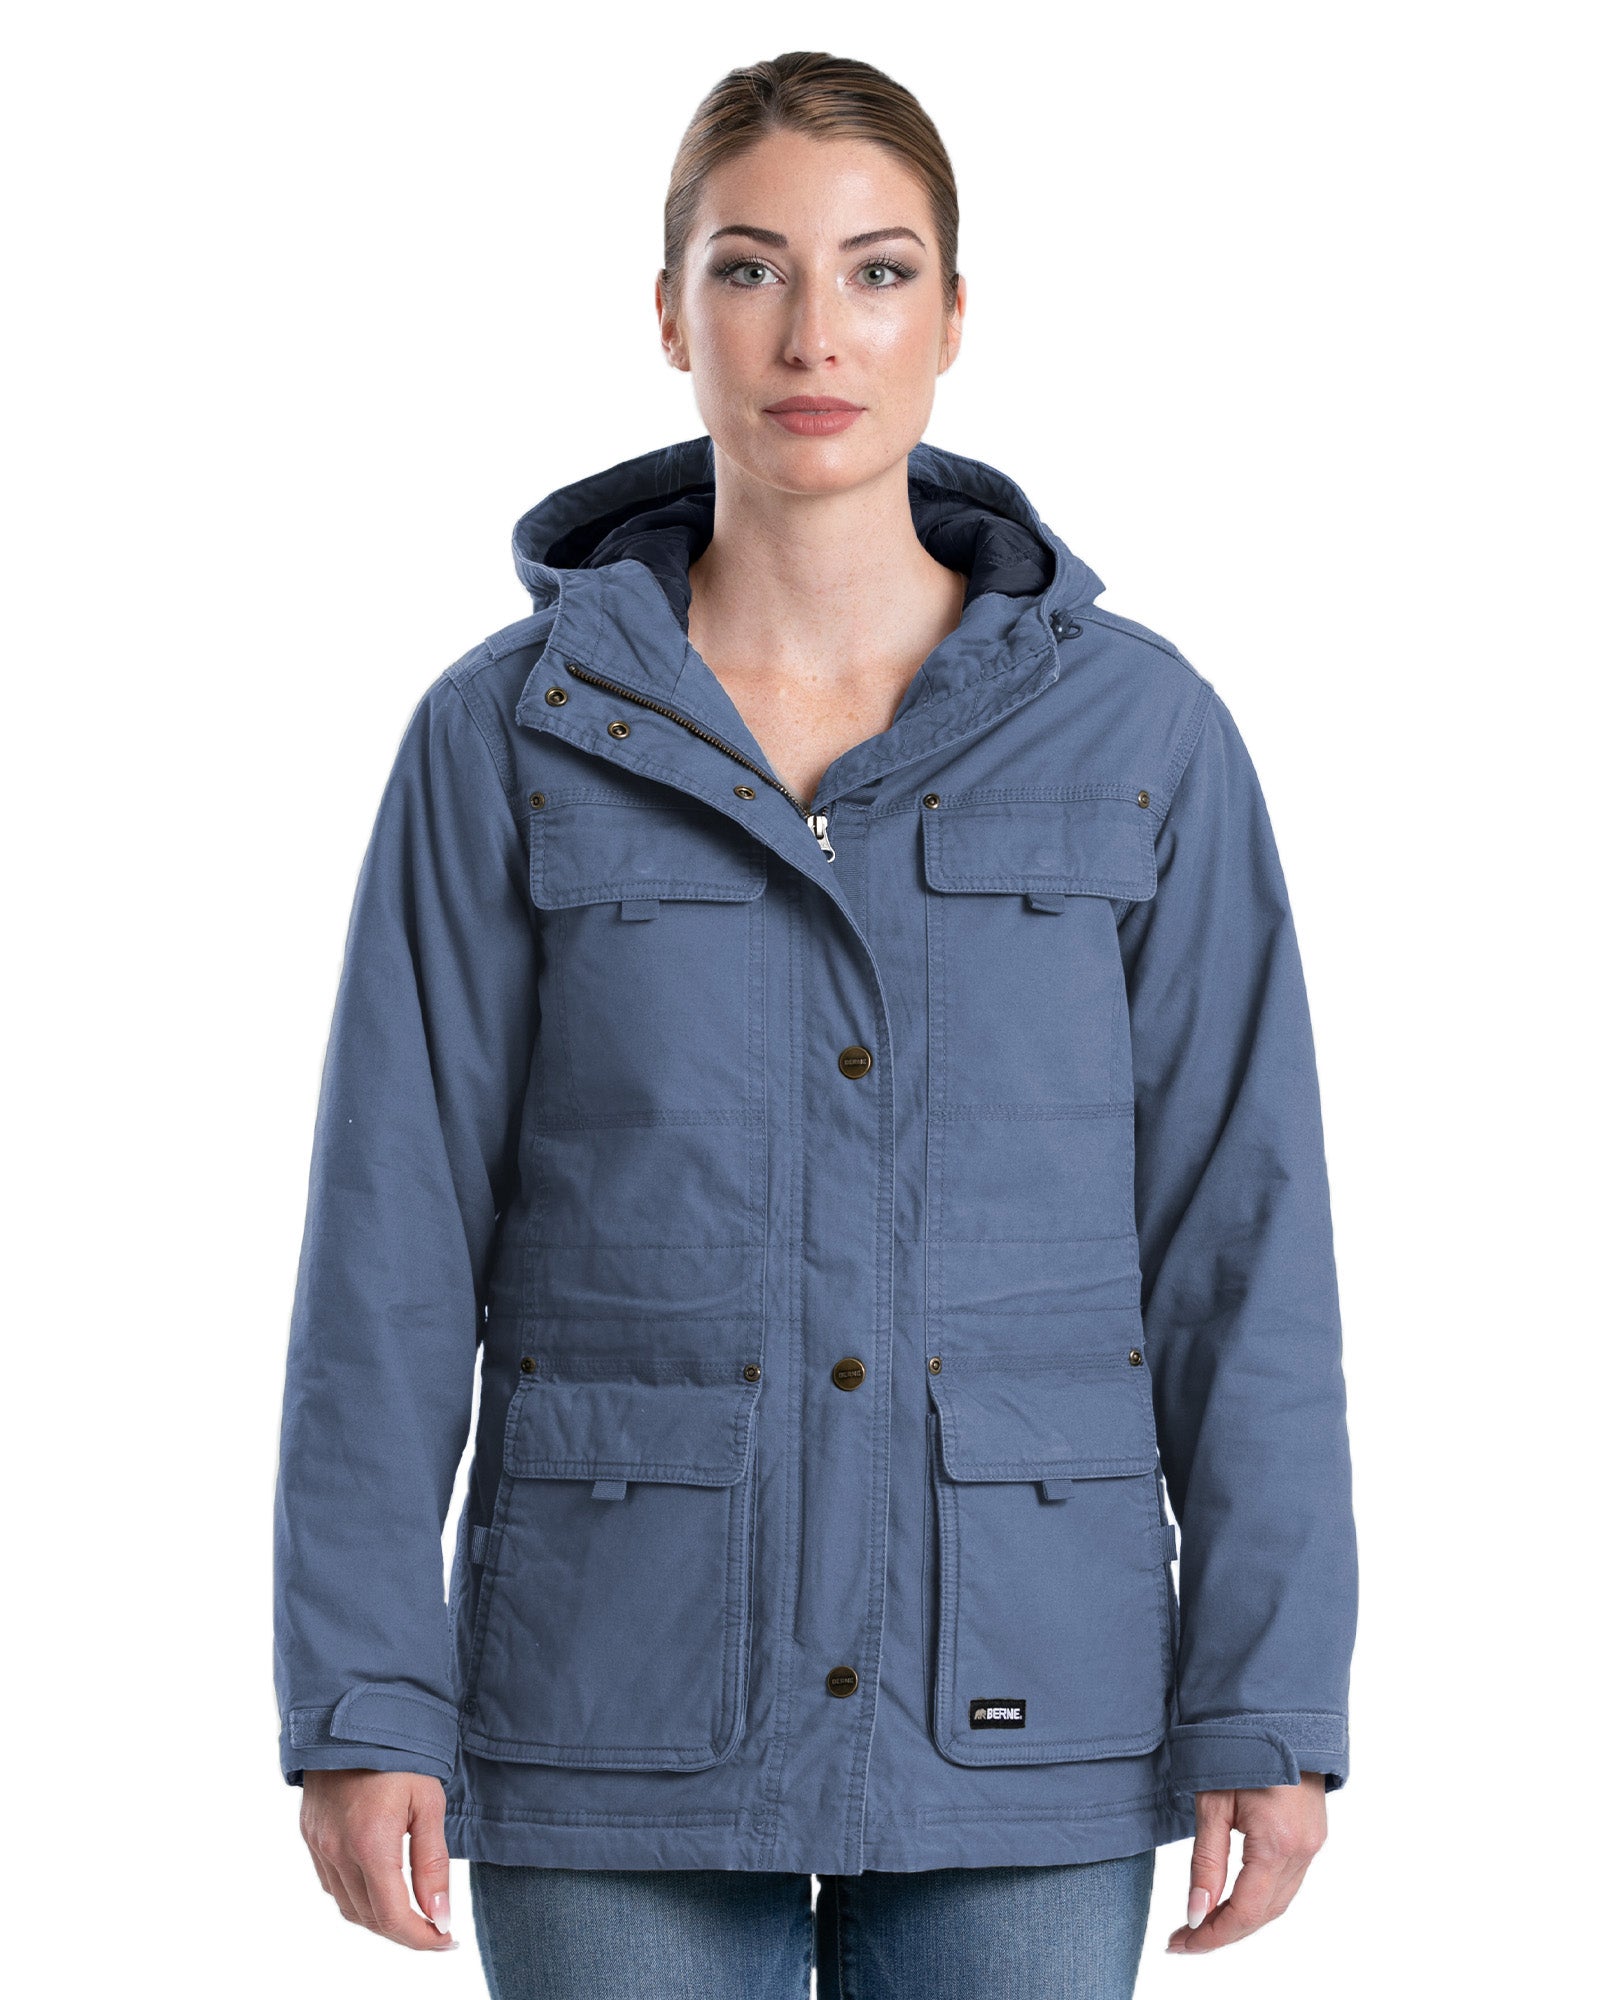 WCH68SLB Women's Softstone Washed Duck Utility Coat